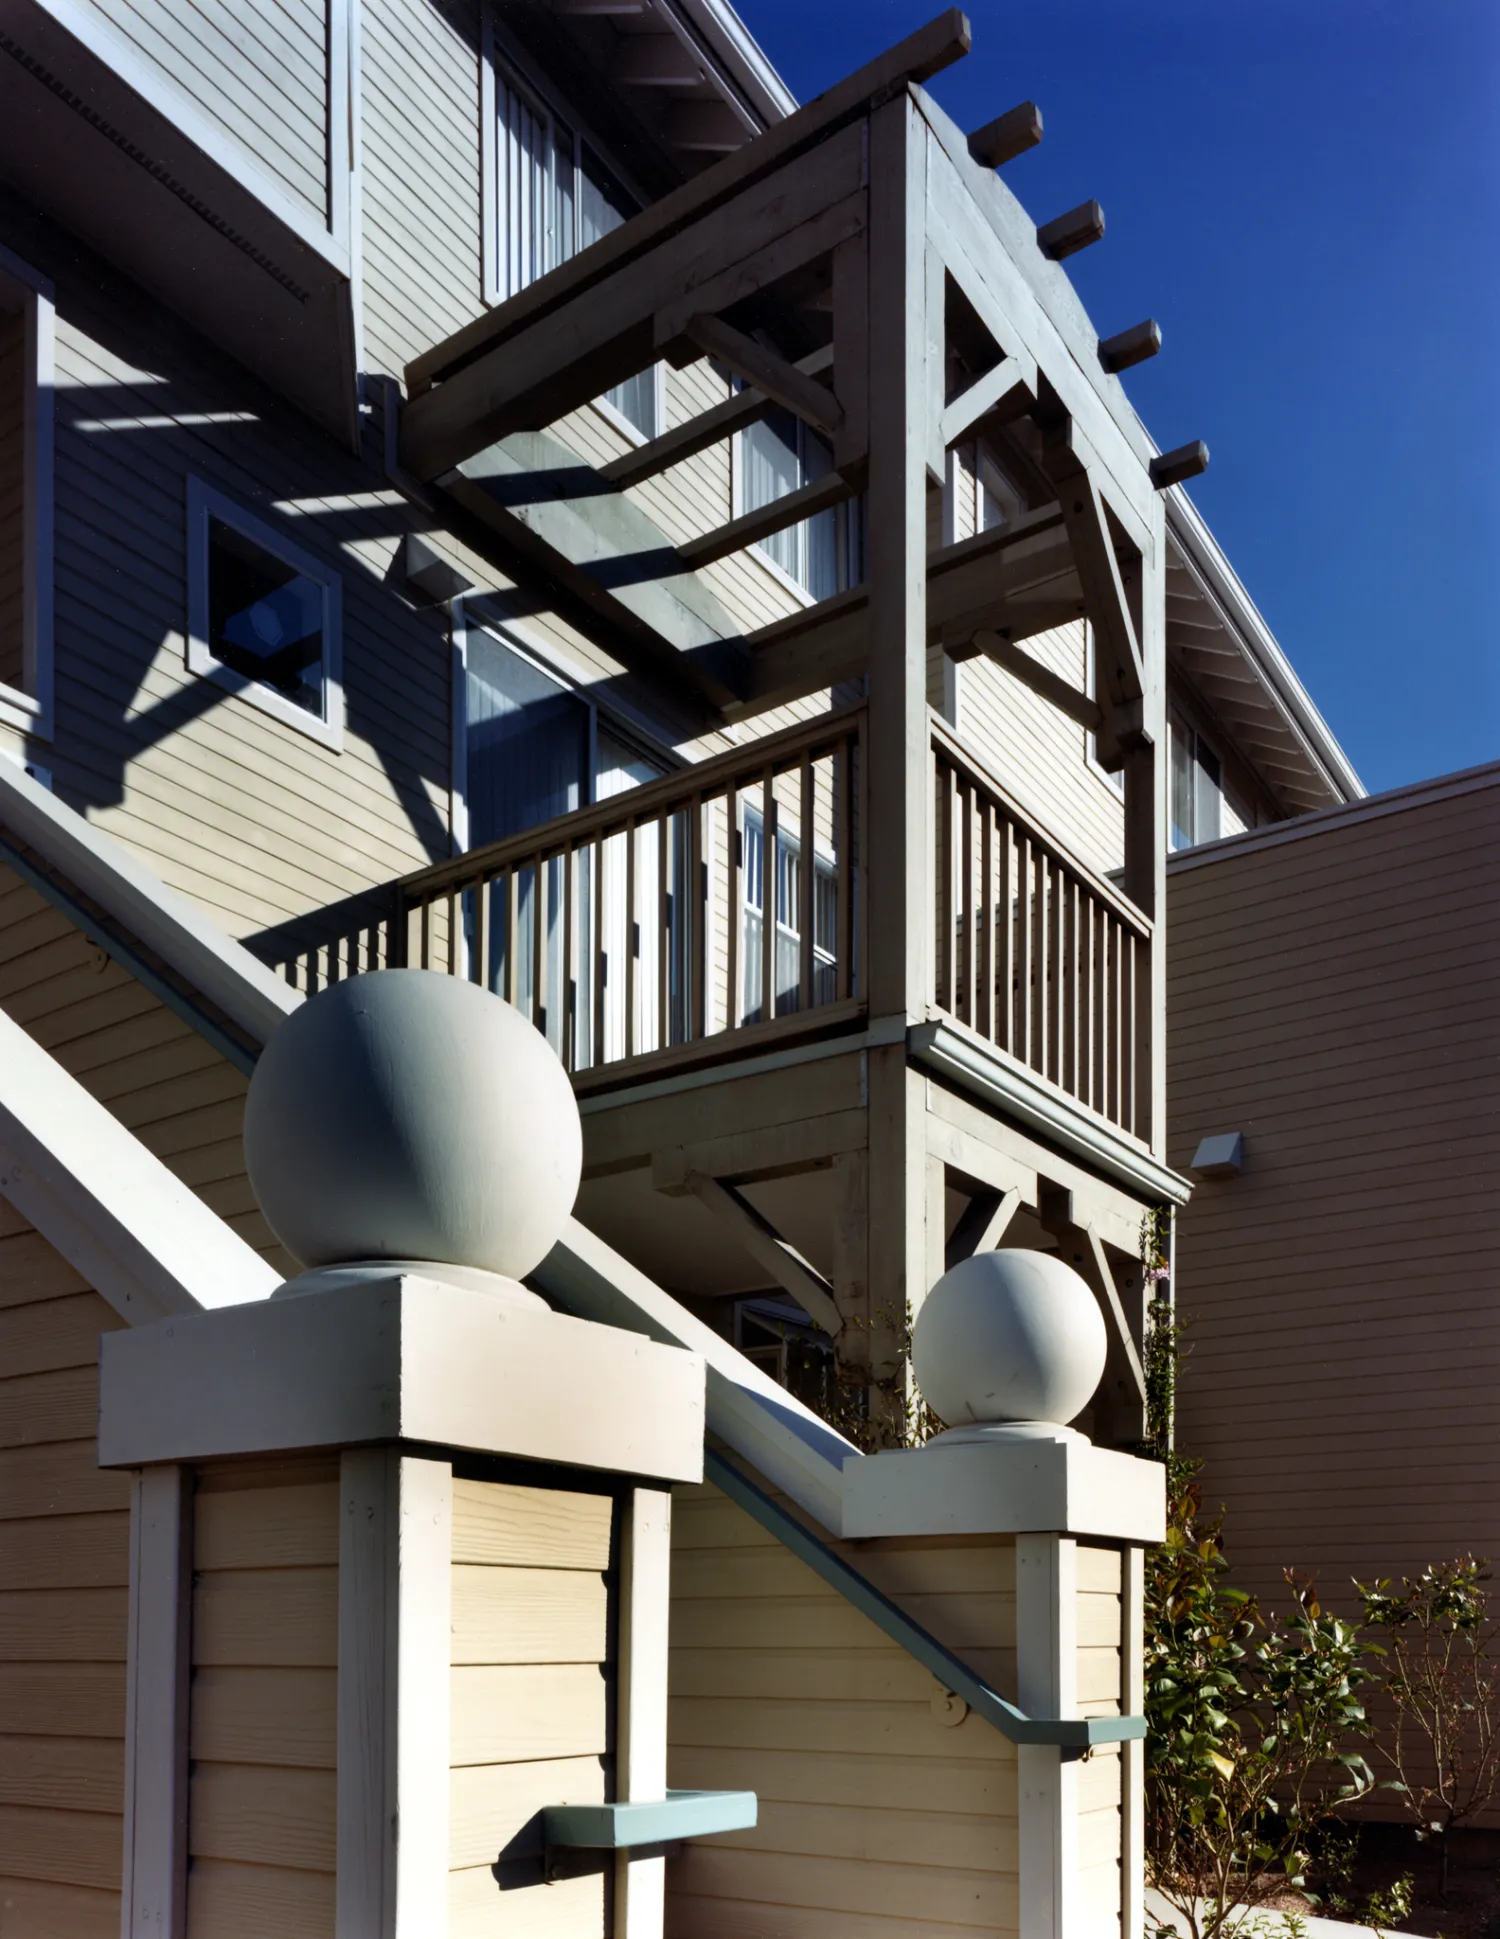 Exterior view of an entry stair and balcony at Meadow Court in San Mateo, California.